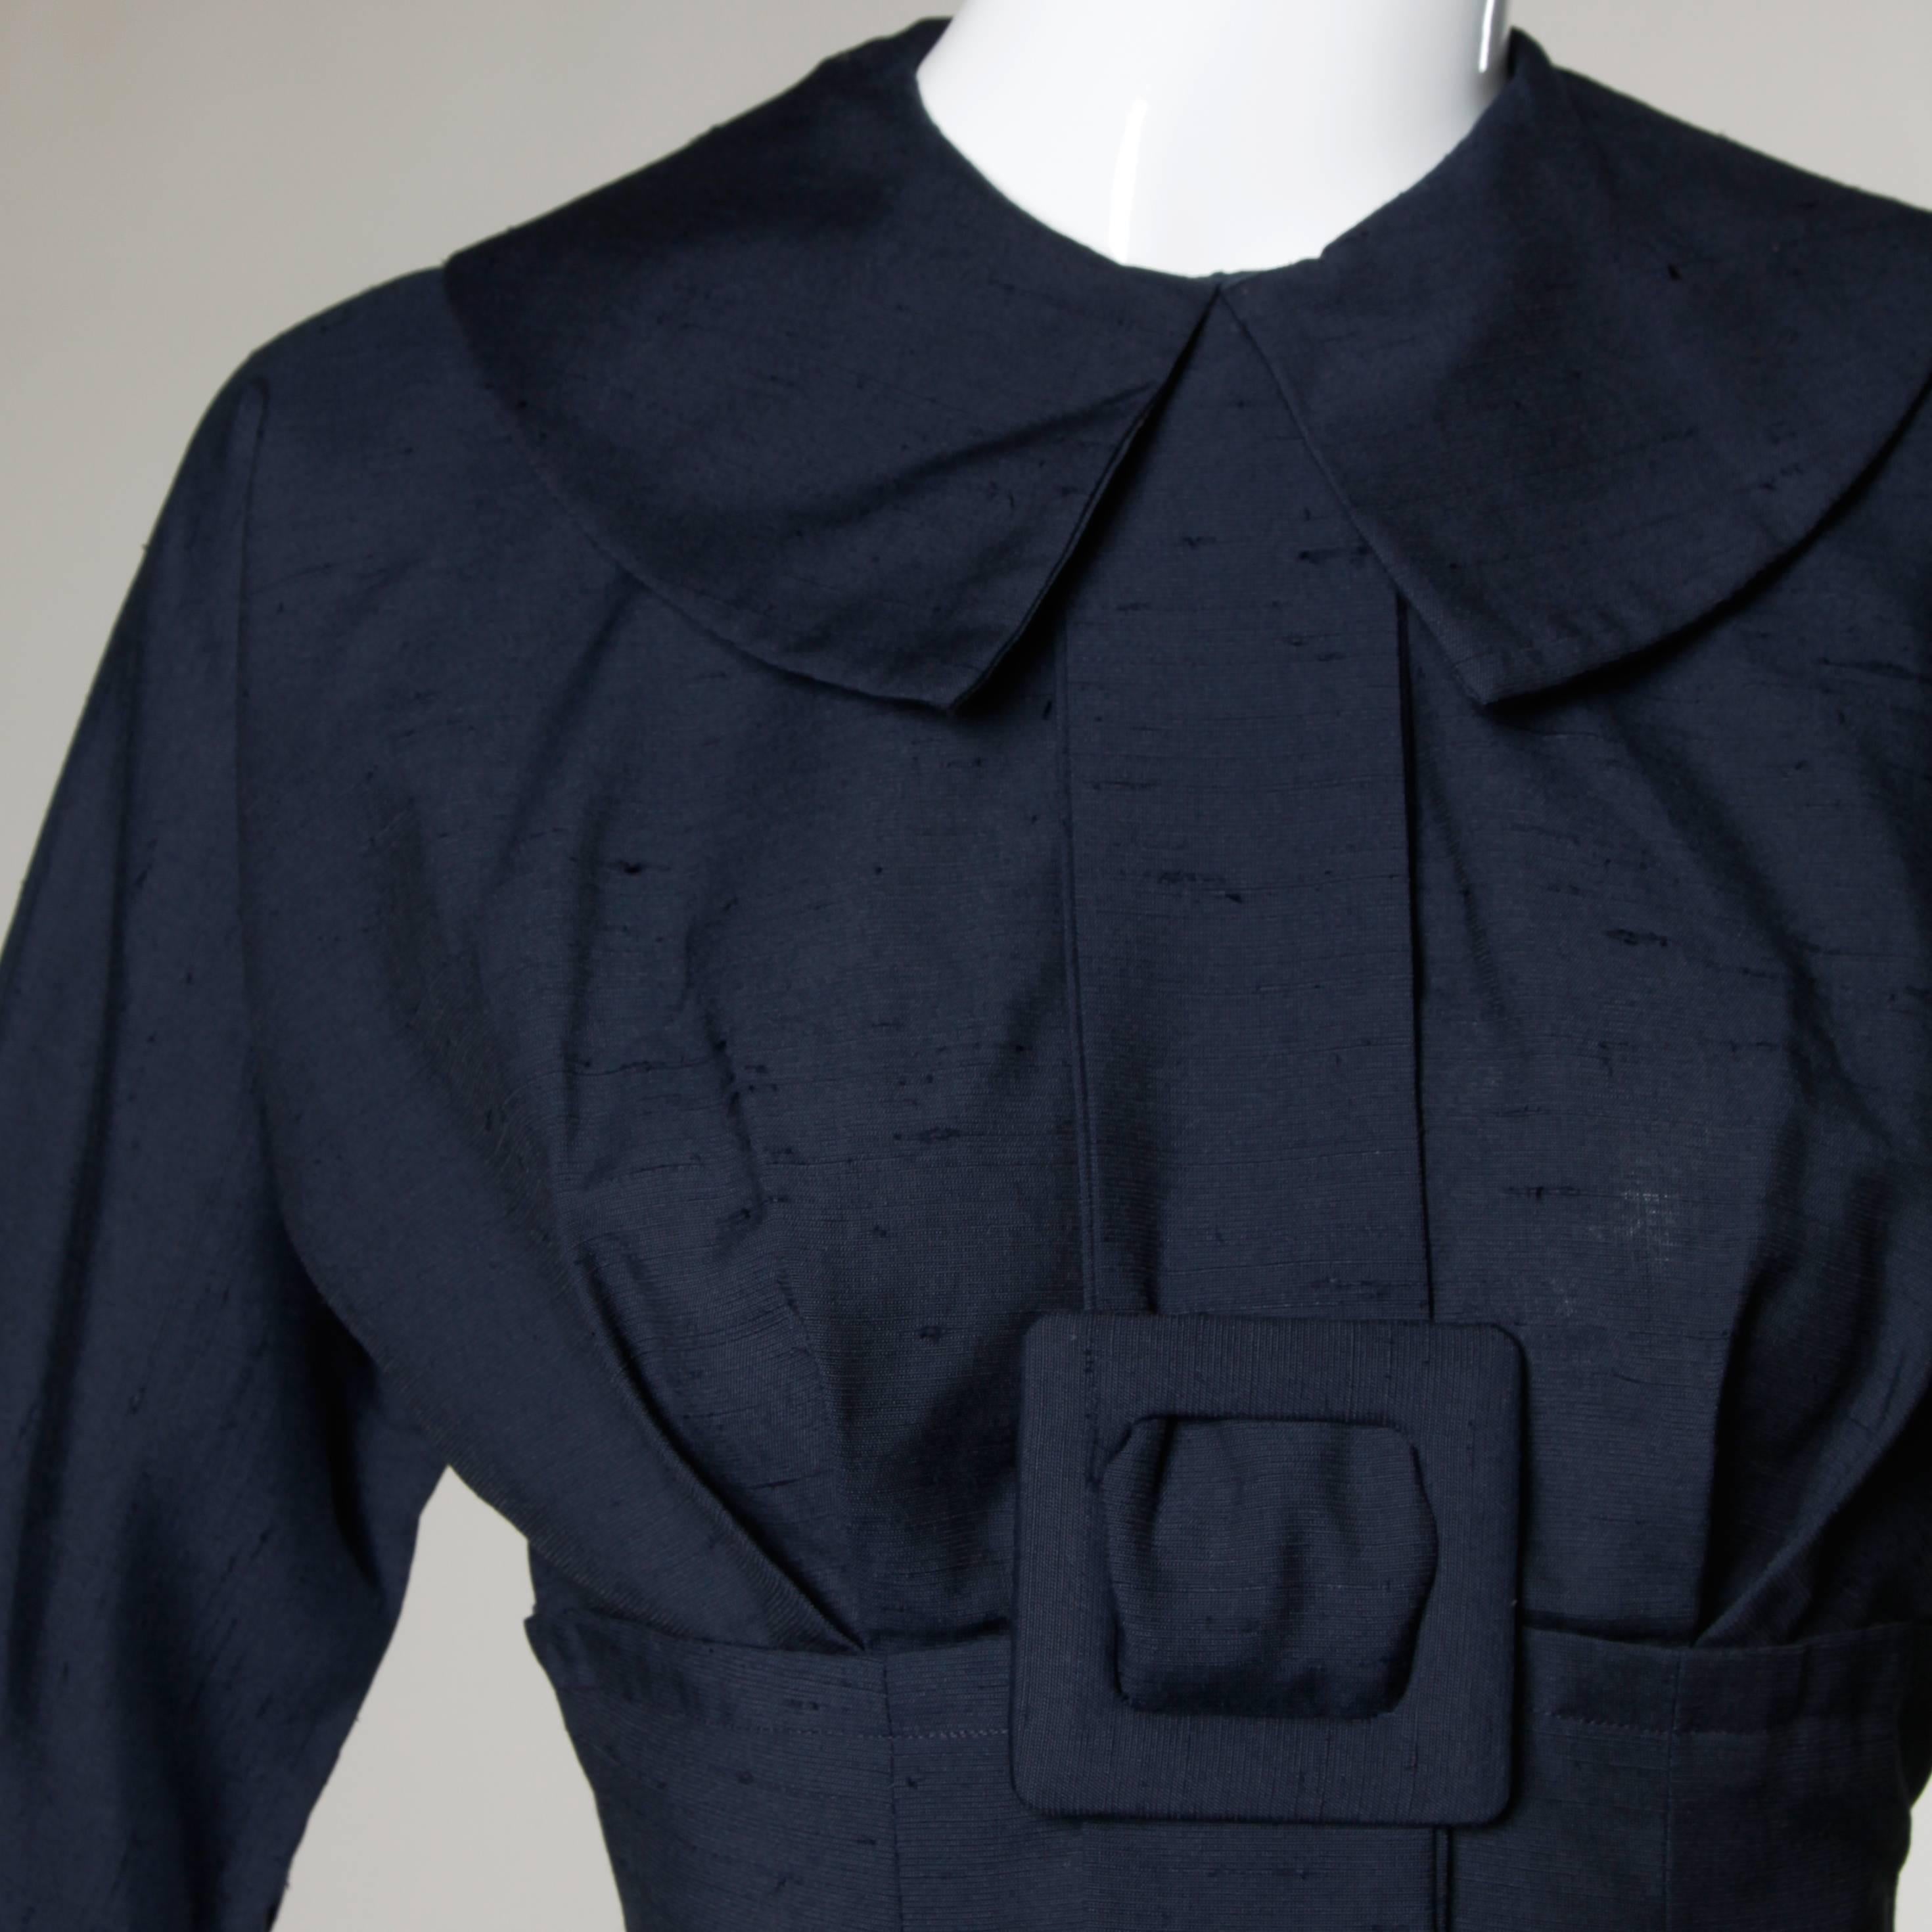 Va-voom! Vintage navy blue wiggle dress with a buckle detail and hourglass silhouette. Cropped sleeves and pilgrim collar.

Details:

Unlined
Back Metal Zip and Hook Closure 
Marked Size: Not Marked
Estimated Size: Small
Color: Navy